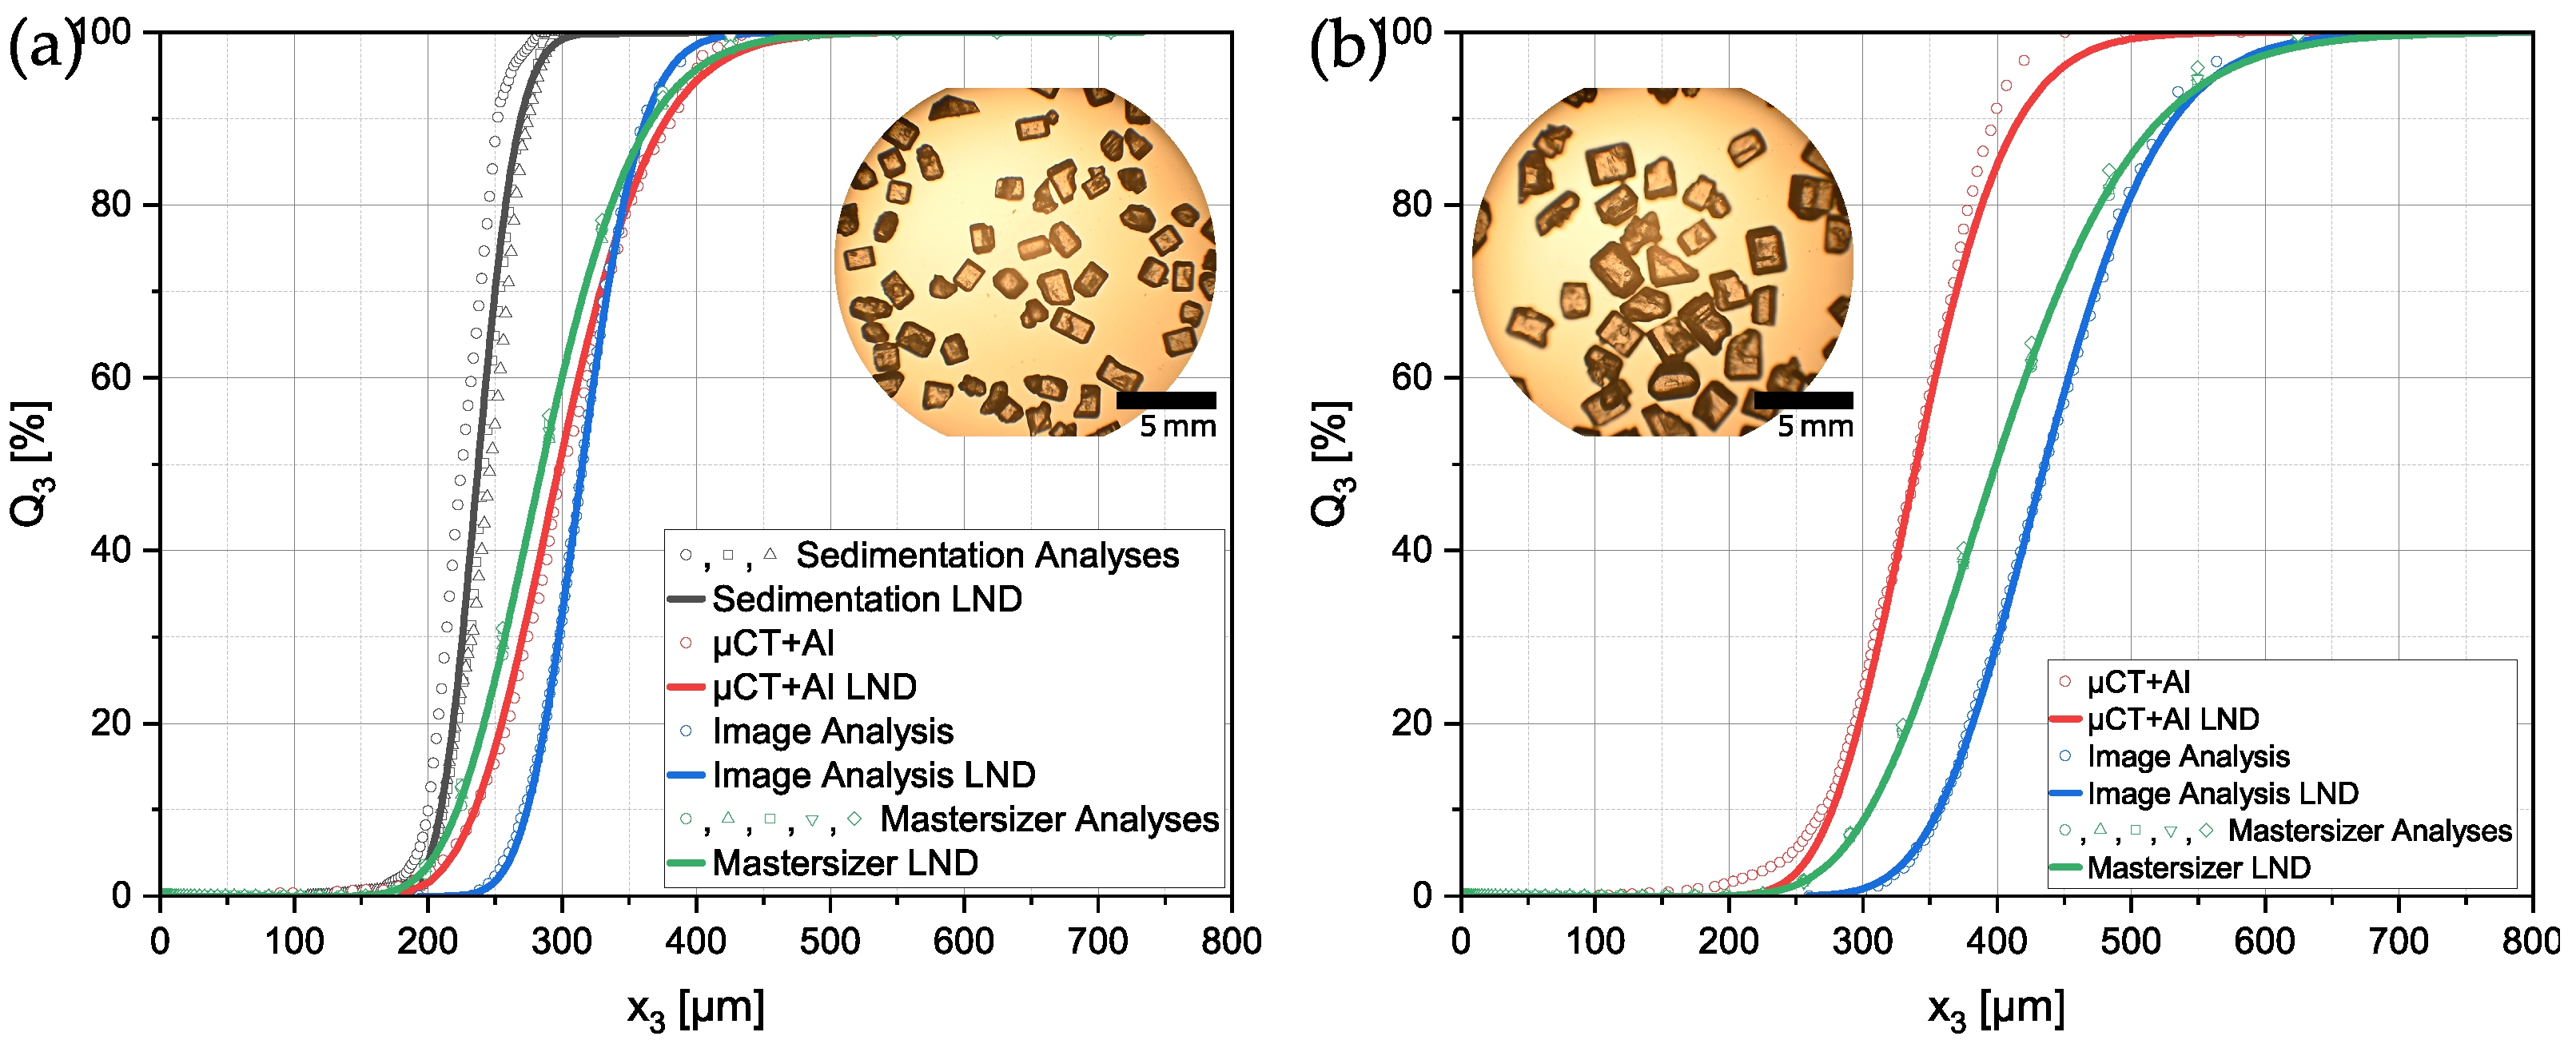 Blending of Log Normal Particle Size Distribution Data from Multiple Image  Analyses Into Single Continuous Data Set - Particle Technology Labs